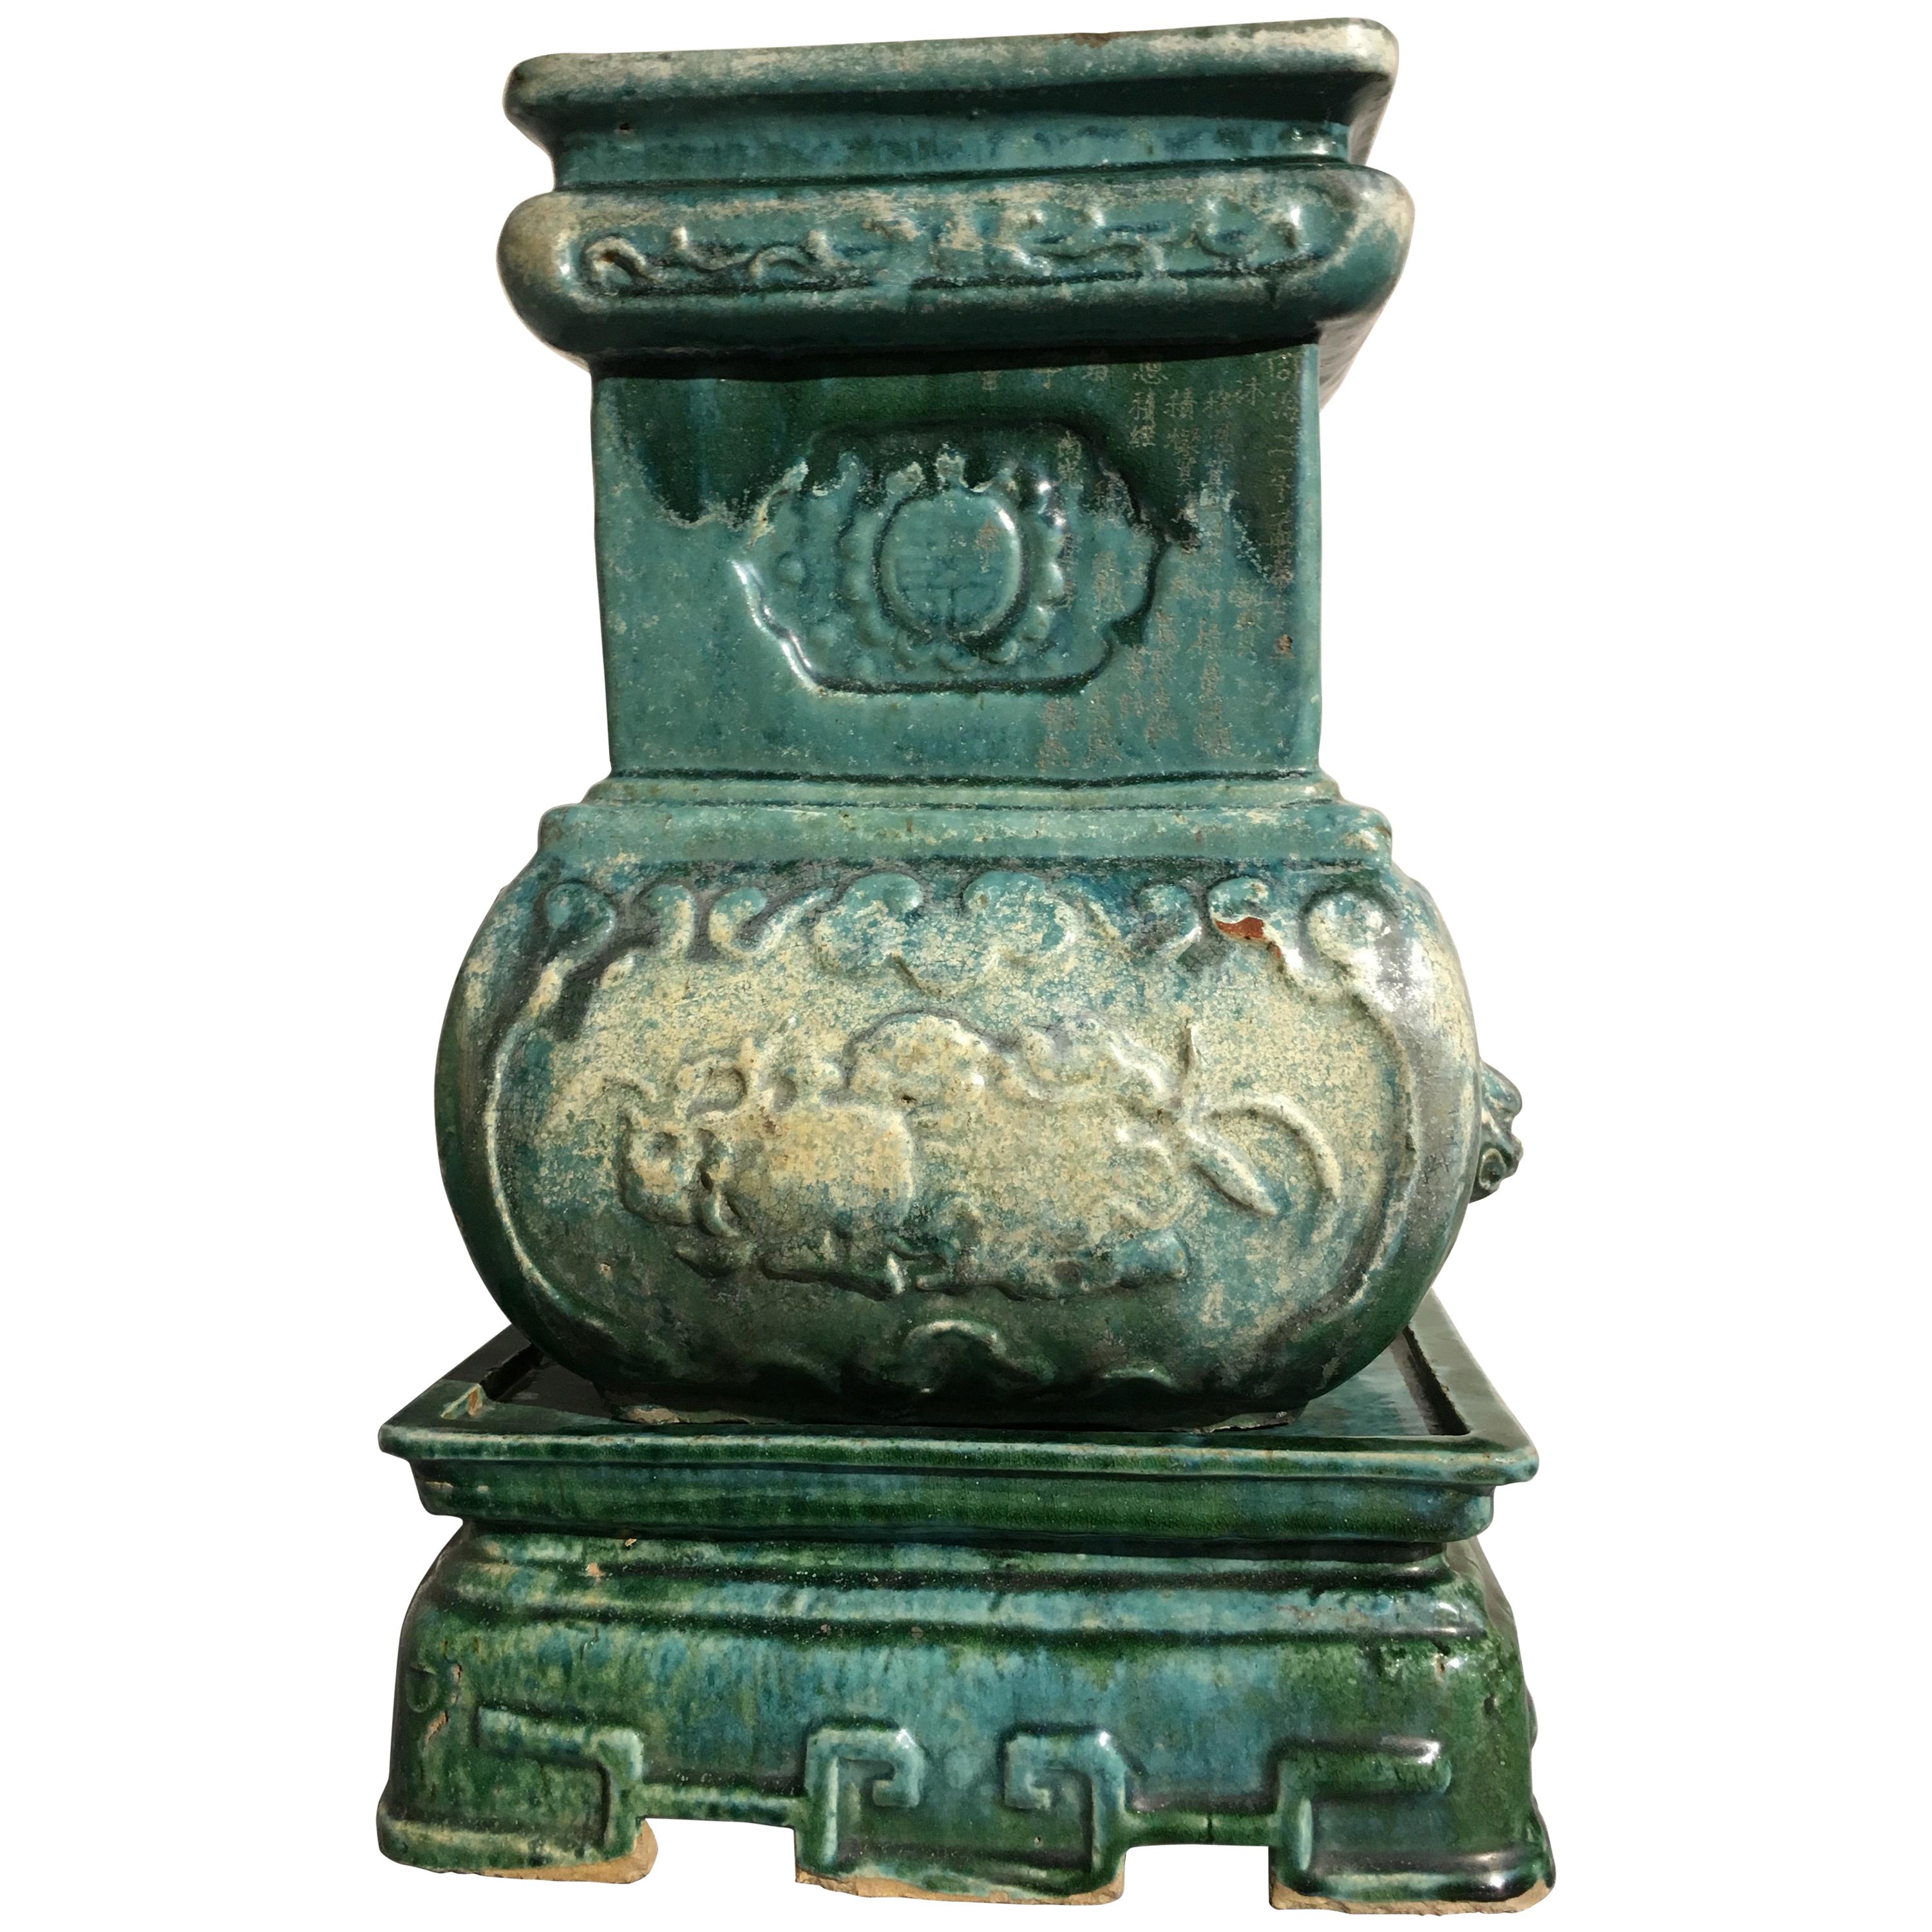 Chinese Qing Dynasty Green Glazed Pottery Incense Burner, Dated 1863